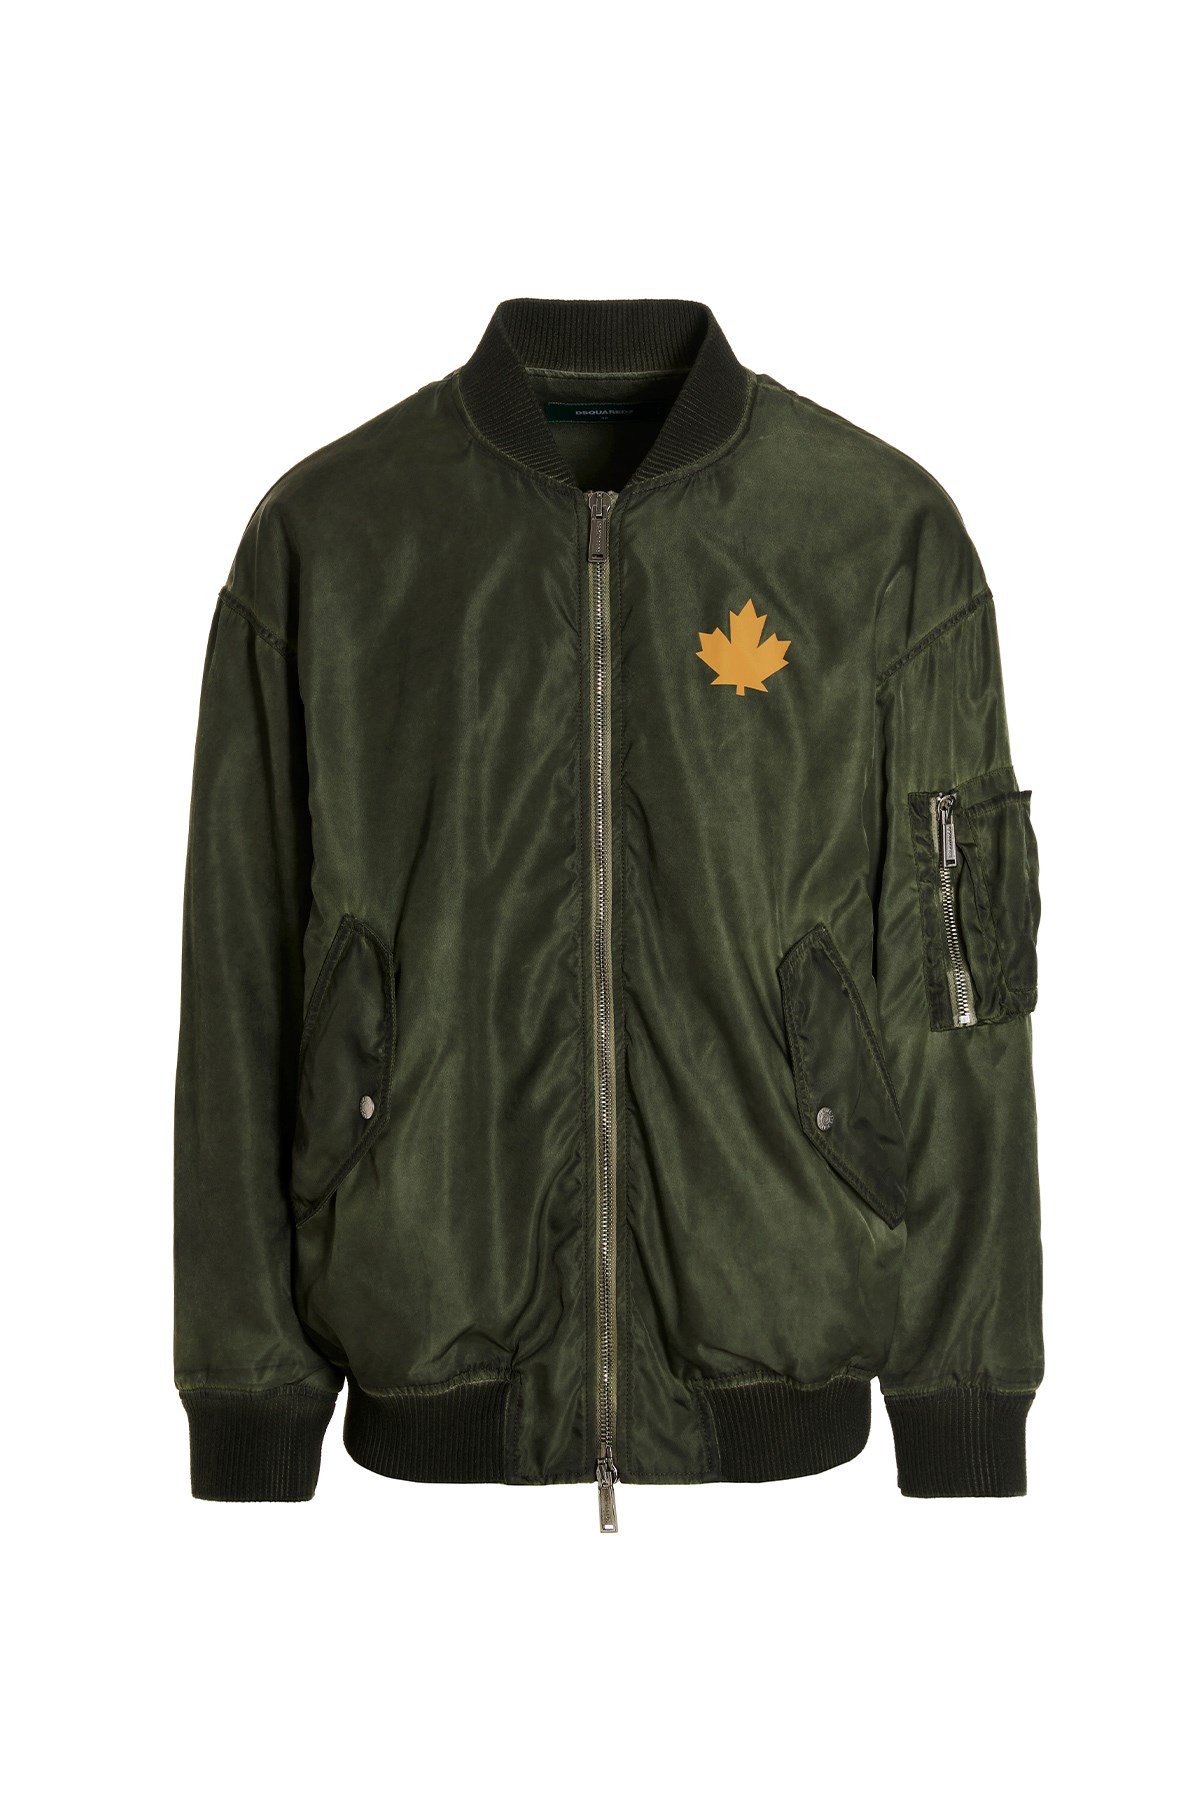 DSQUARED2 'One Life One Planet’ Bomber Jacket